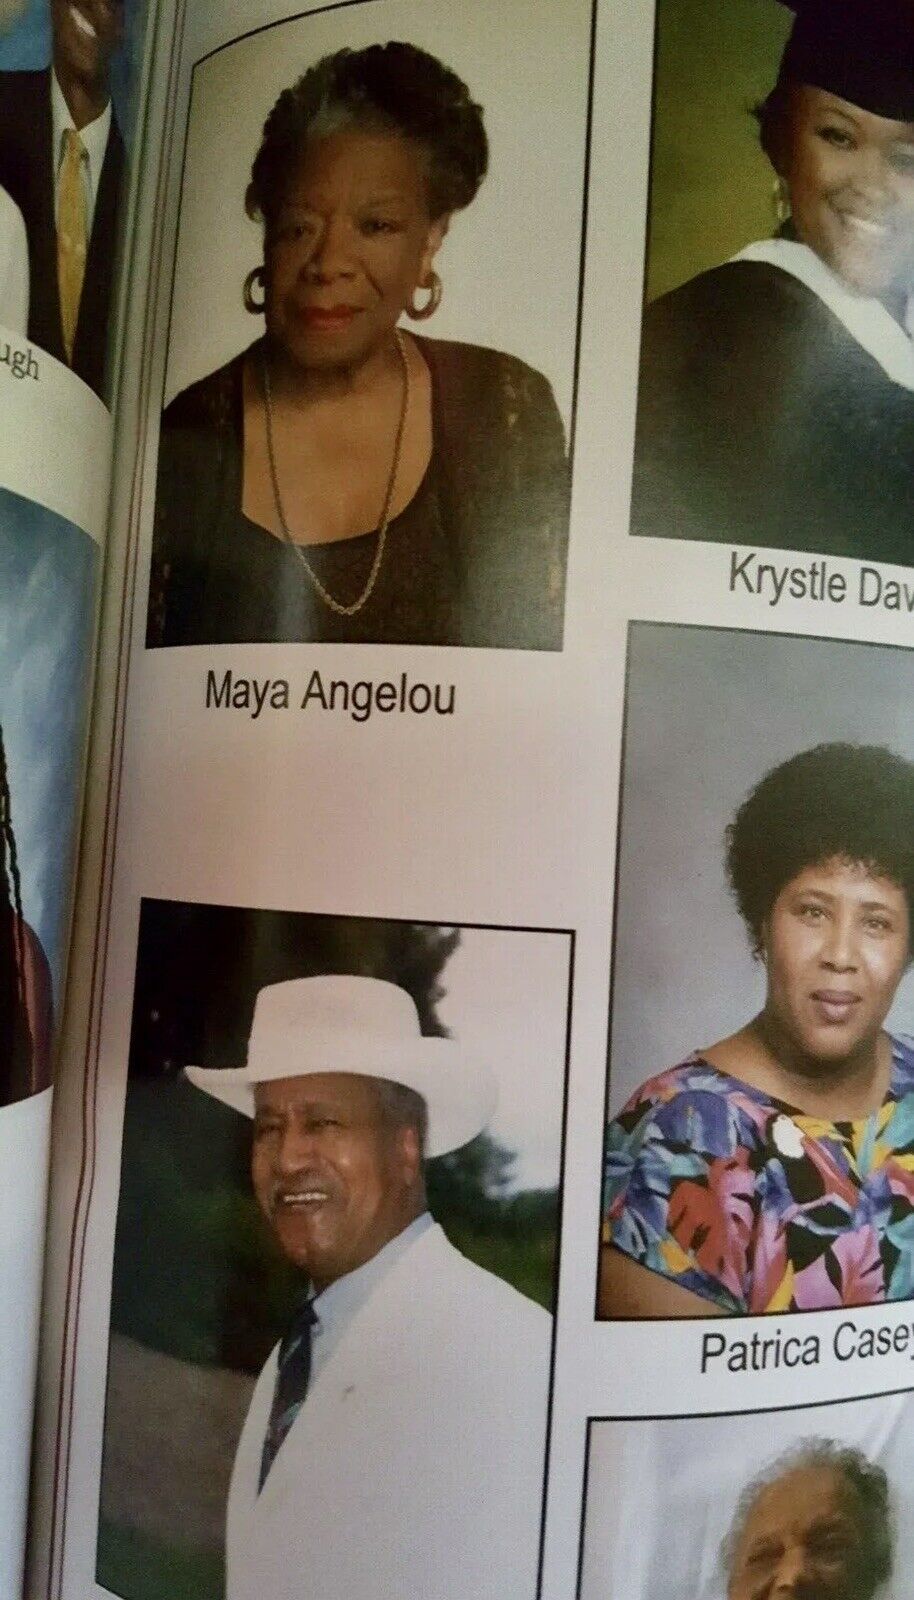 DR MAYA ANGELOU PERSONAL CHURCH BOOK FROM HER ESTATE 2006 MT ZION BAPTIST CHURCH